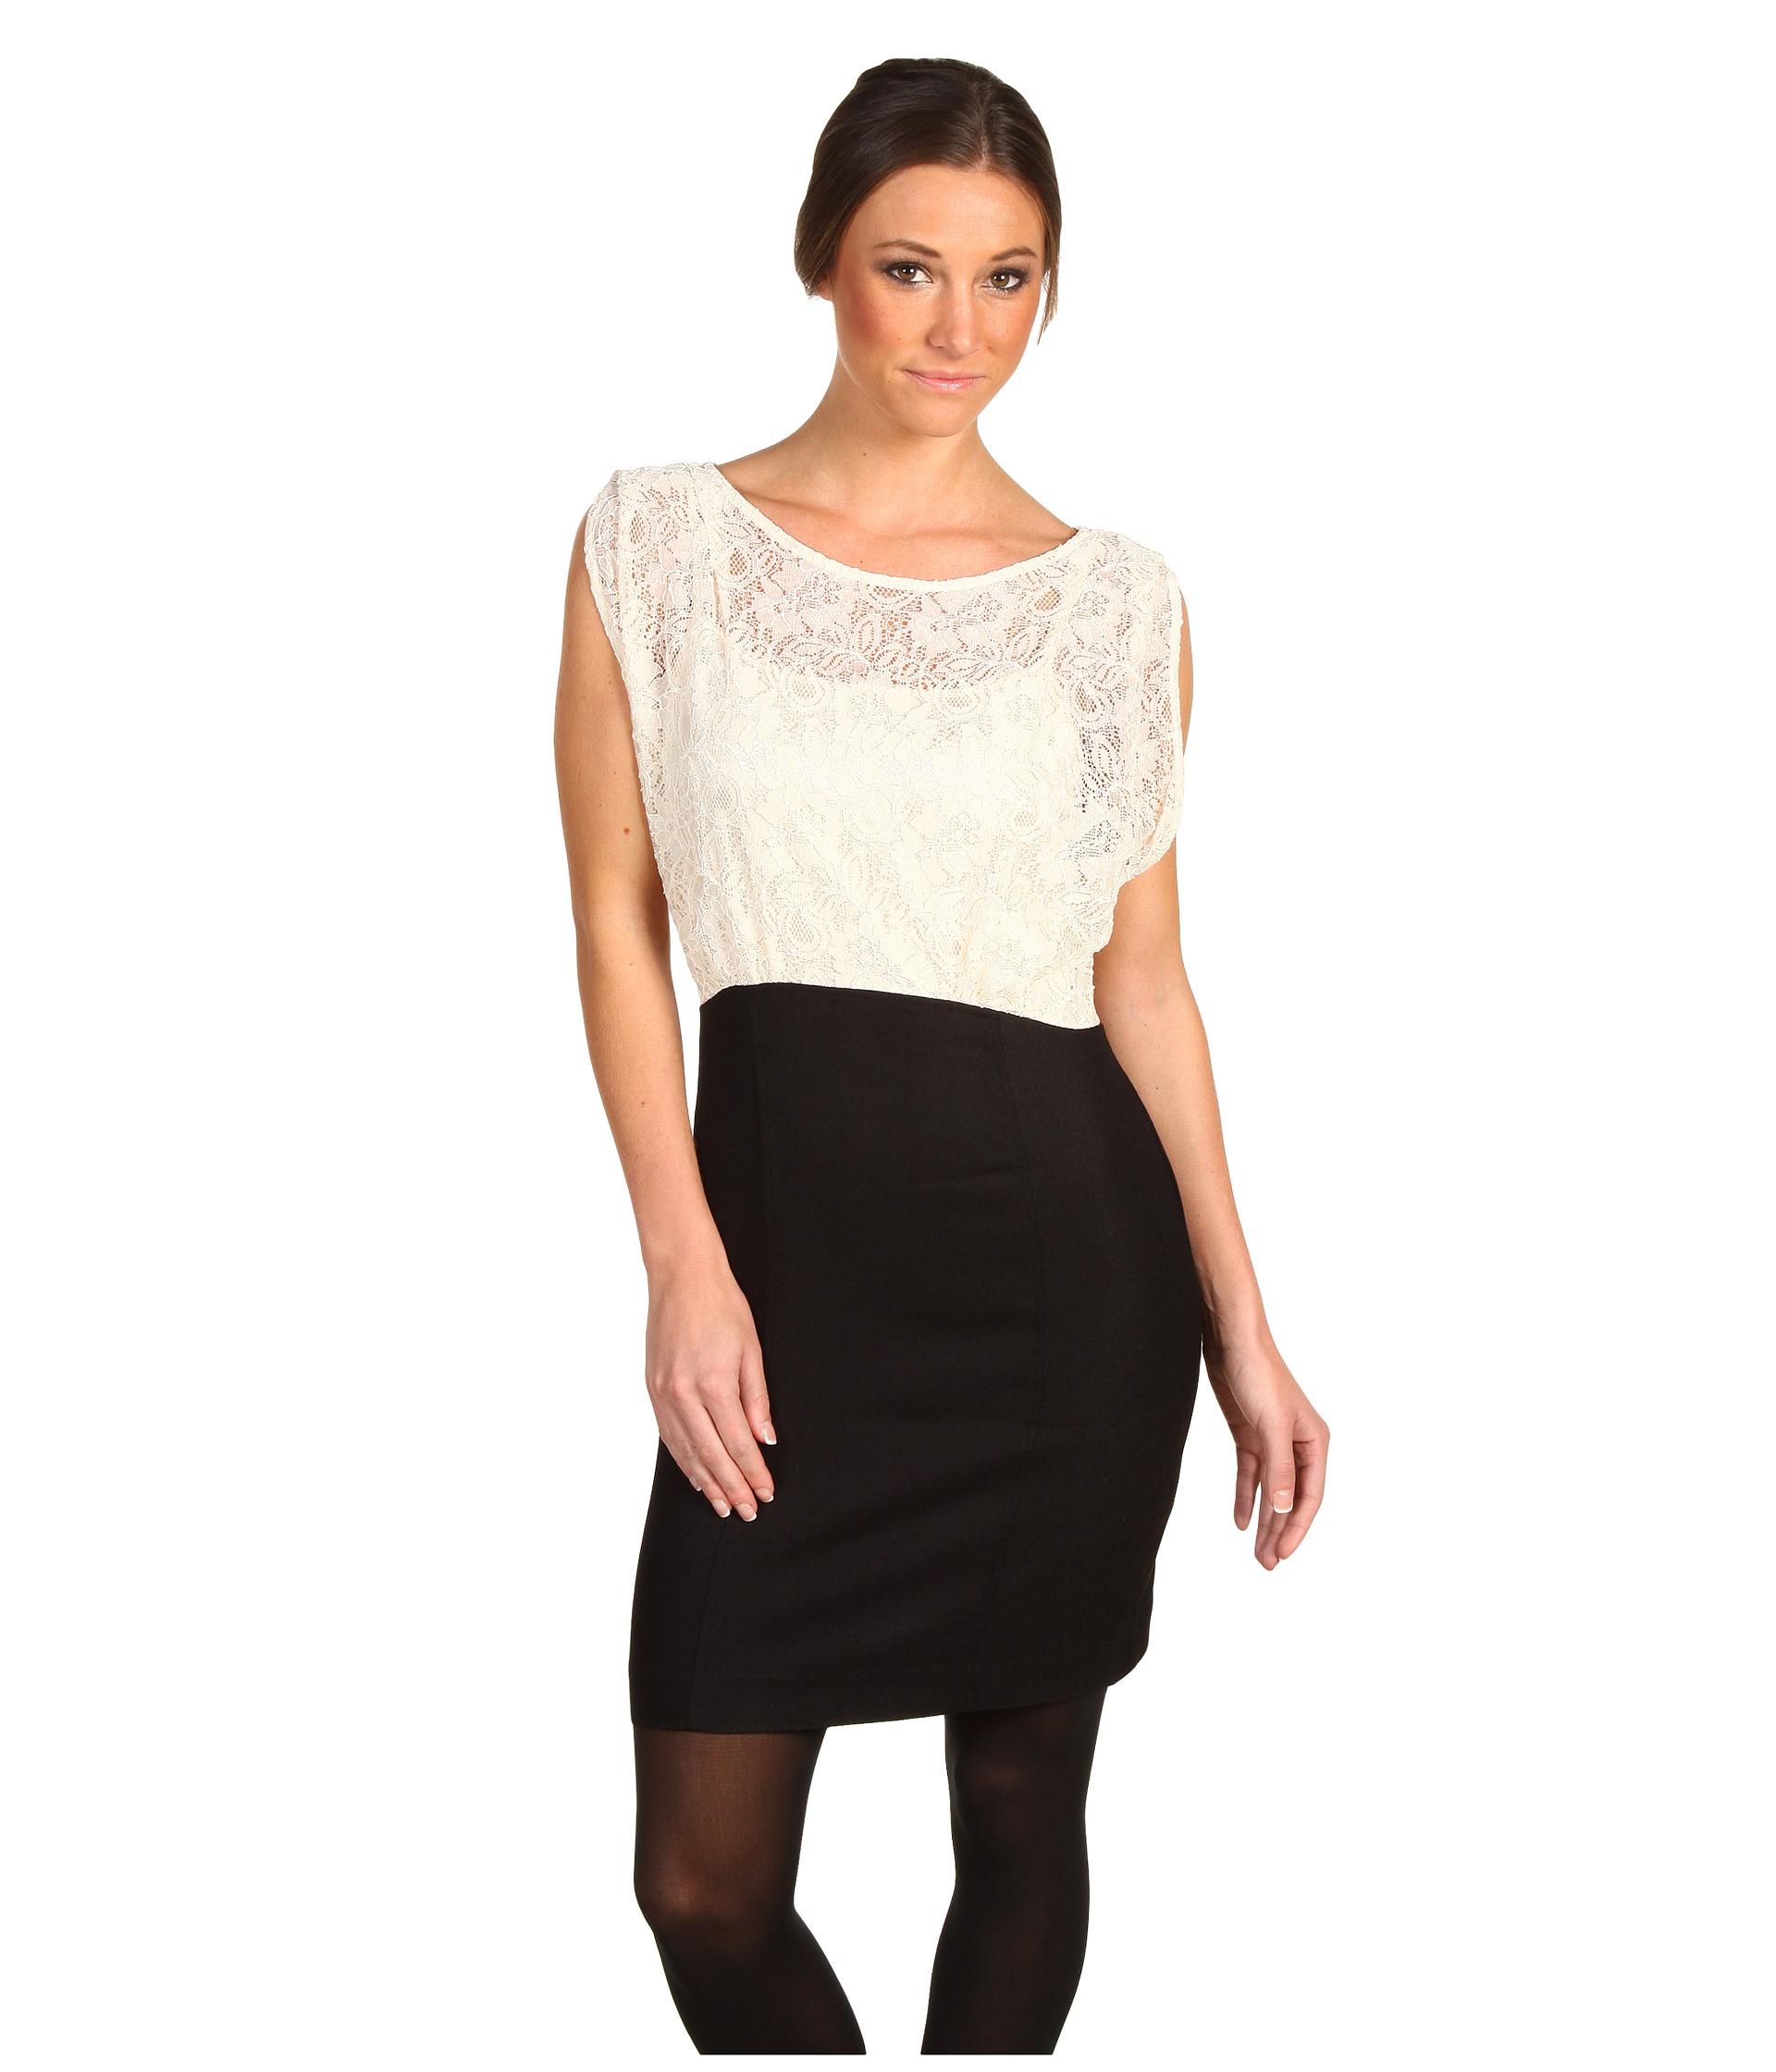 French Connection Lark Rise Lace Dress $134.99 (  MSRP $268.00 